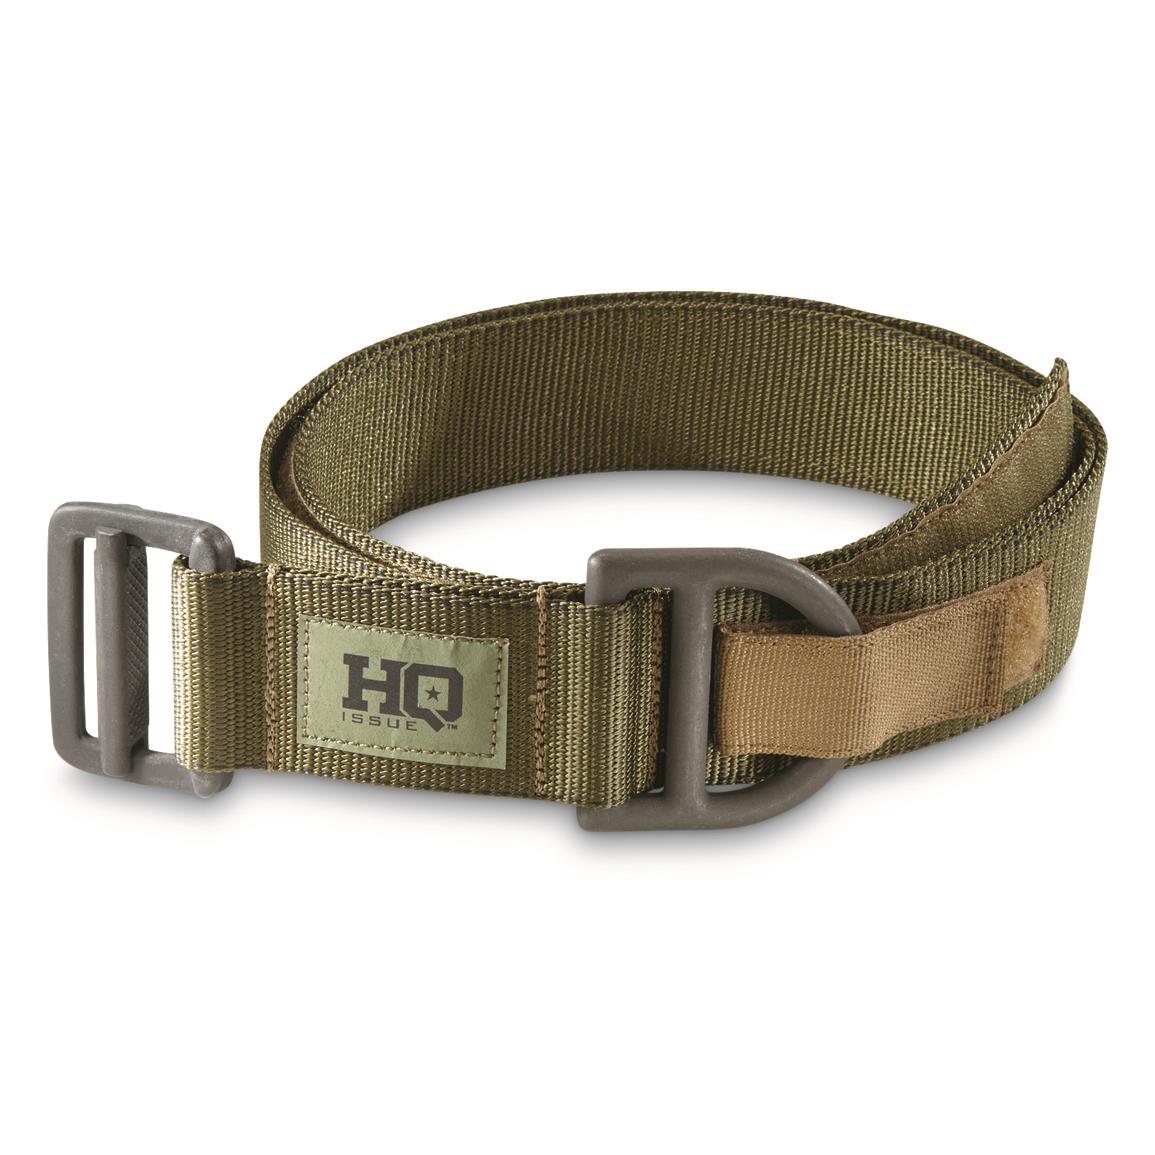 HQ ISSUE US-Made Tactical Riggers Belt, Olive Drab